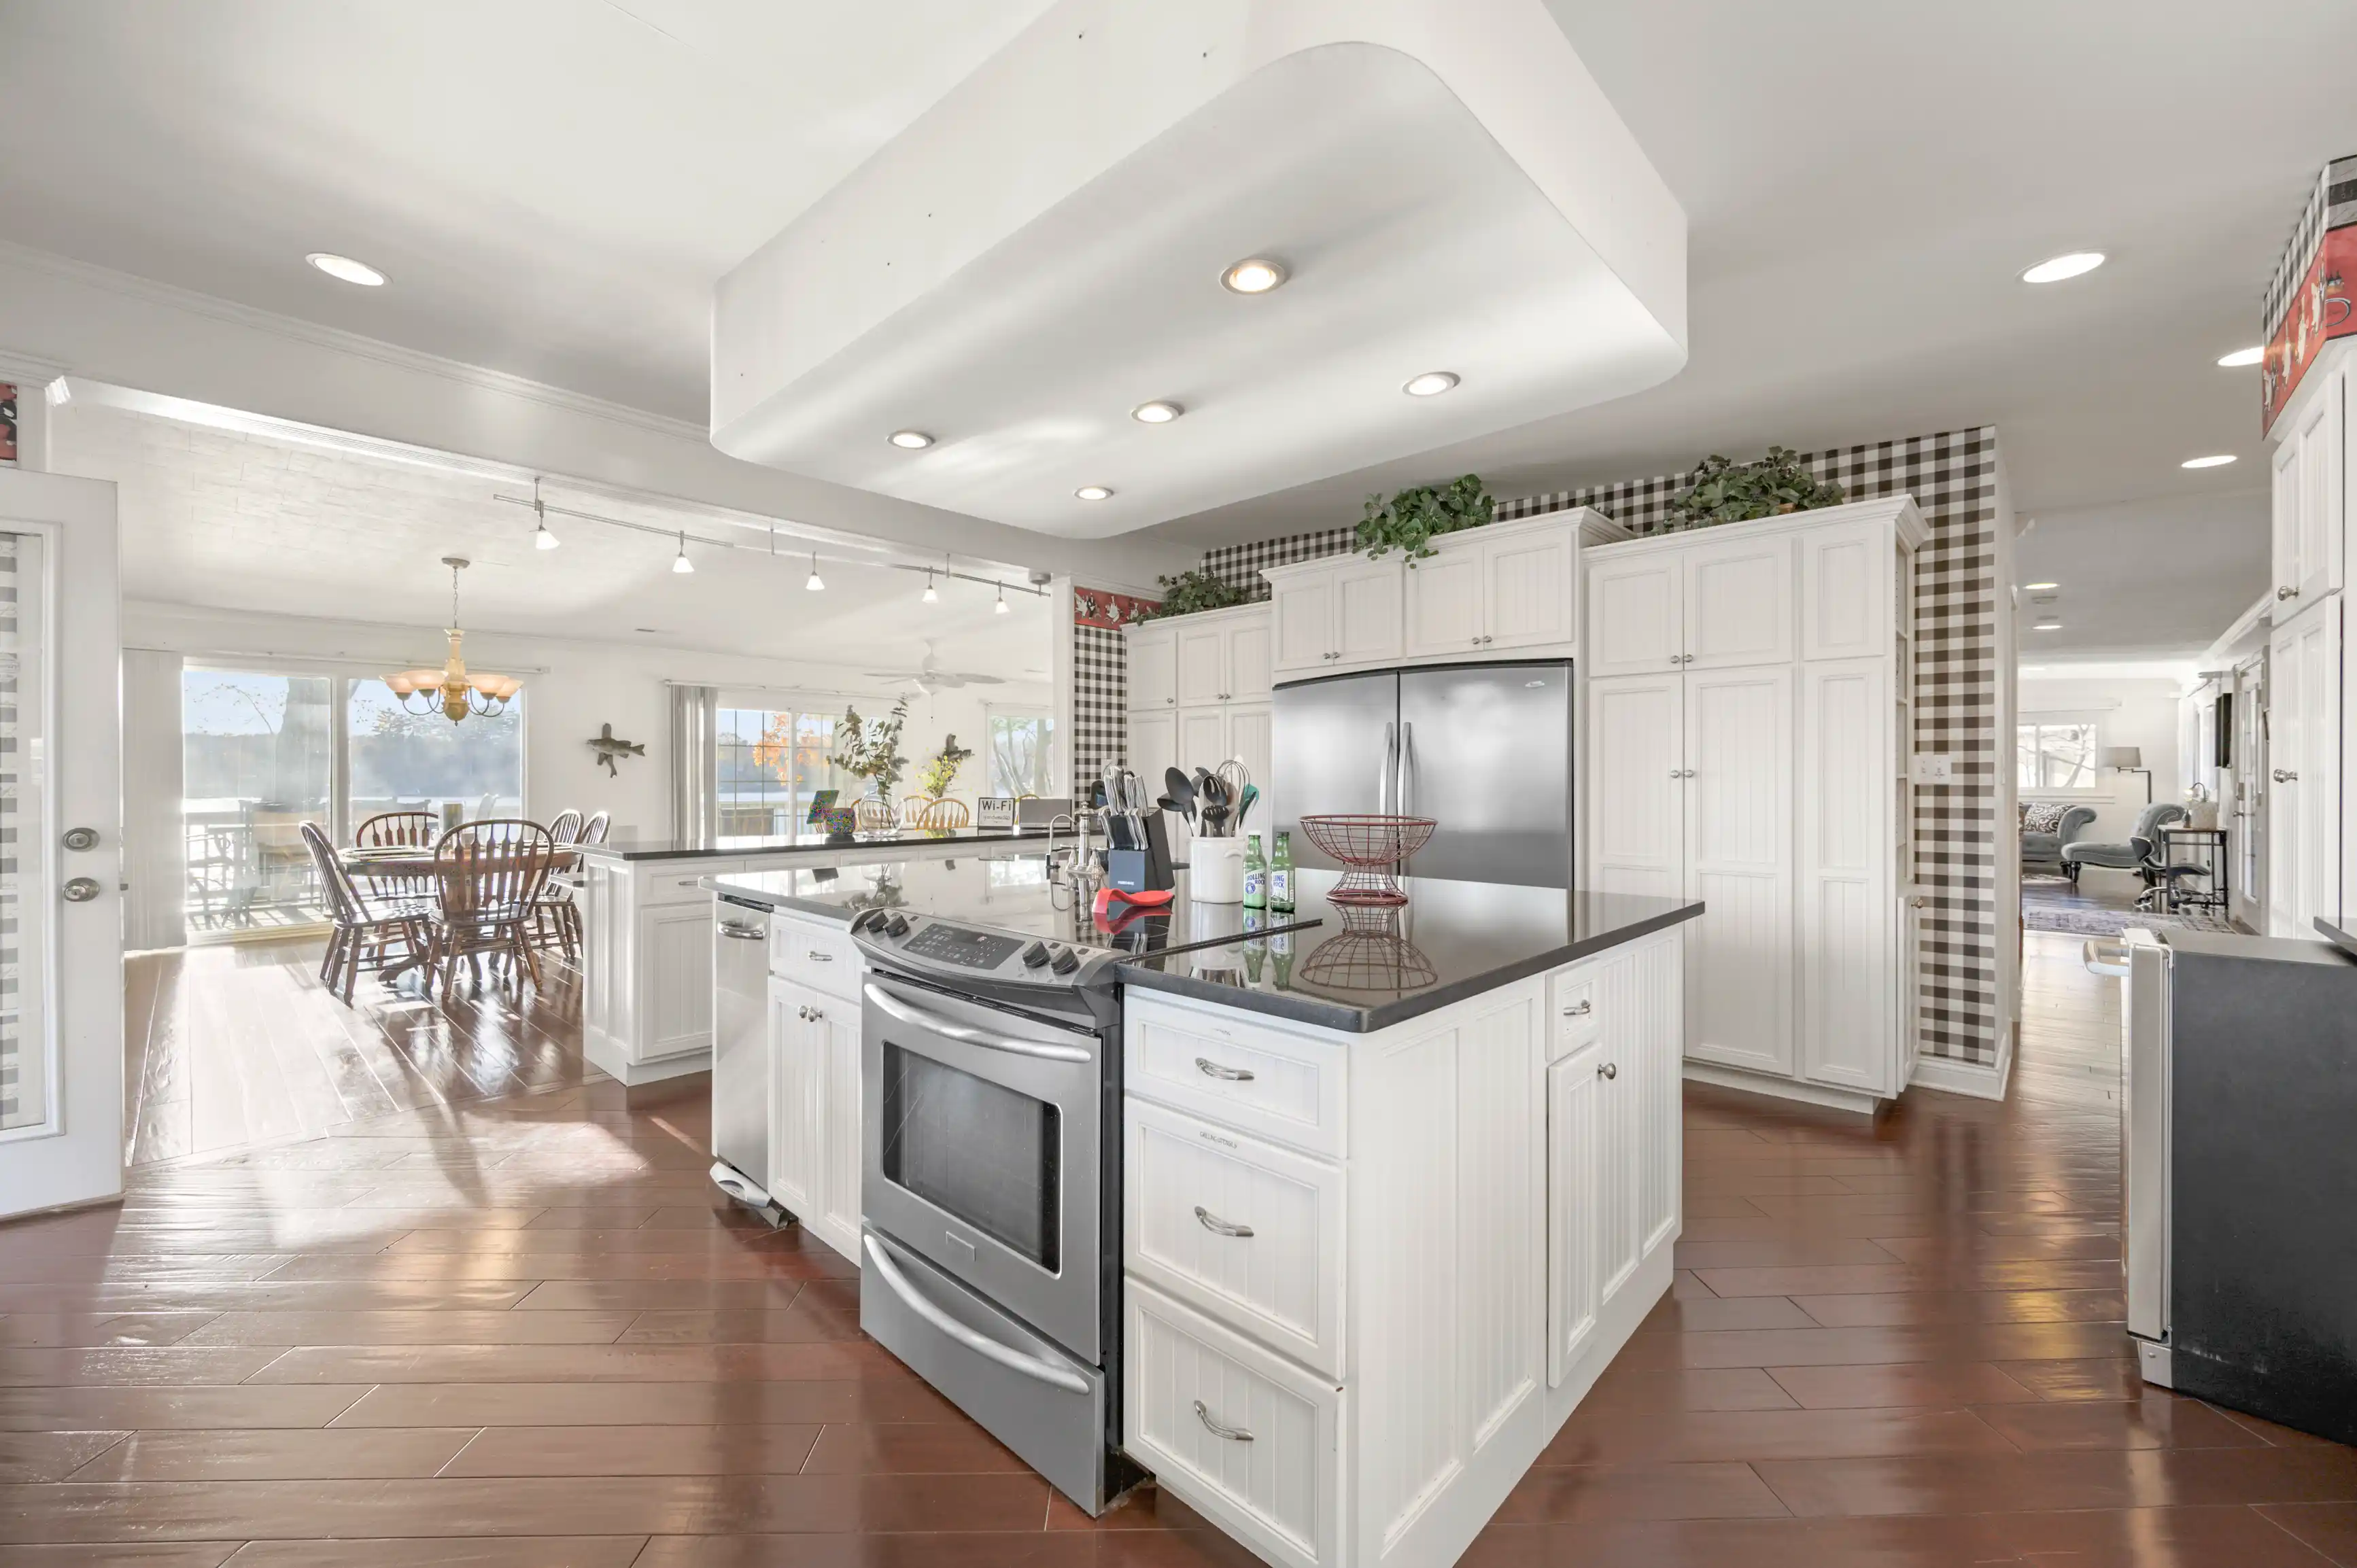 Bright and spacious kitchen with white cabinetry, stainless steel appliances, and a dining area with a wooden table set by large windows.